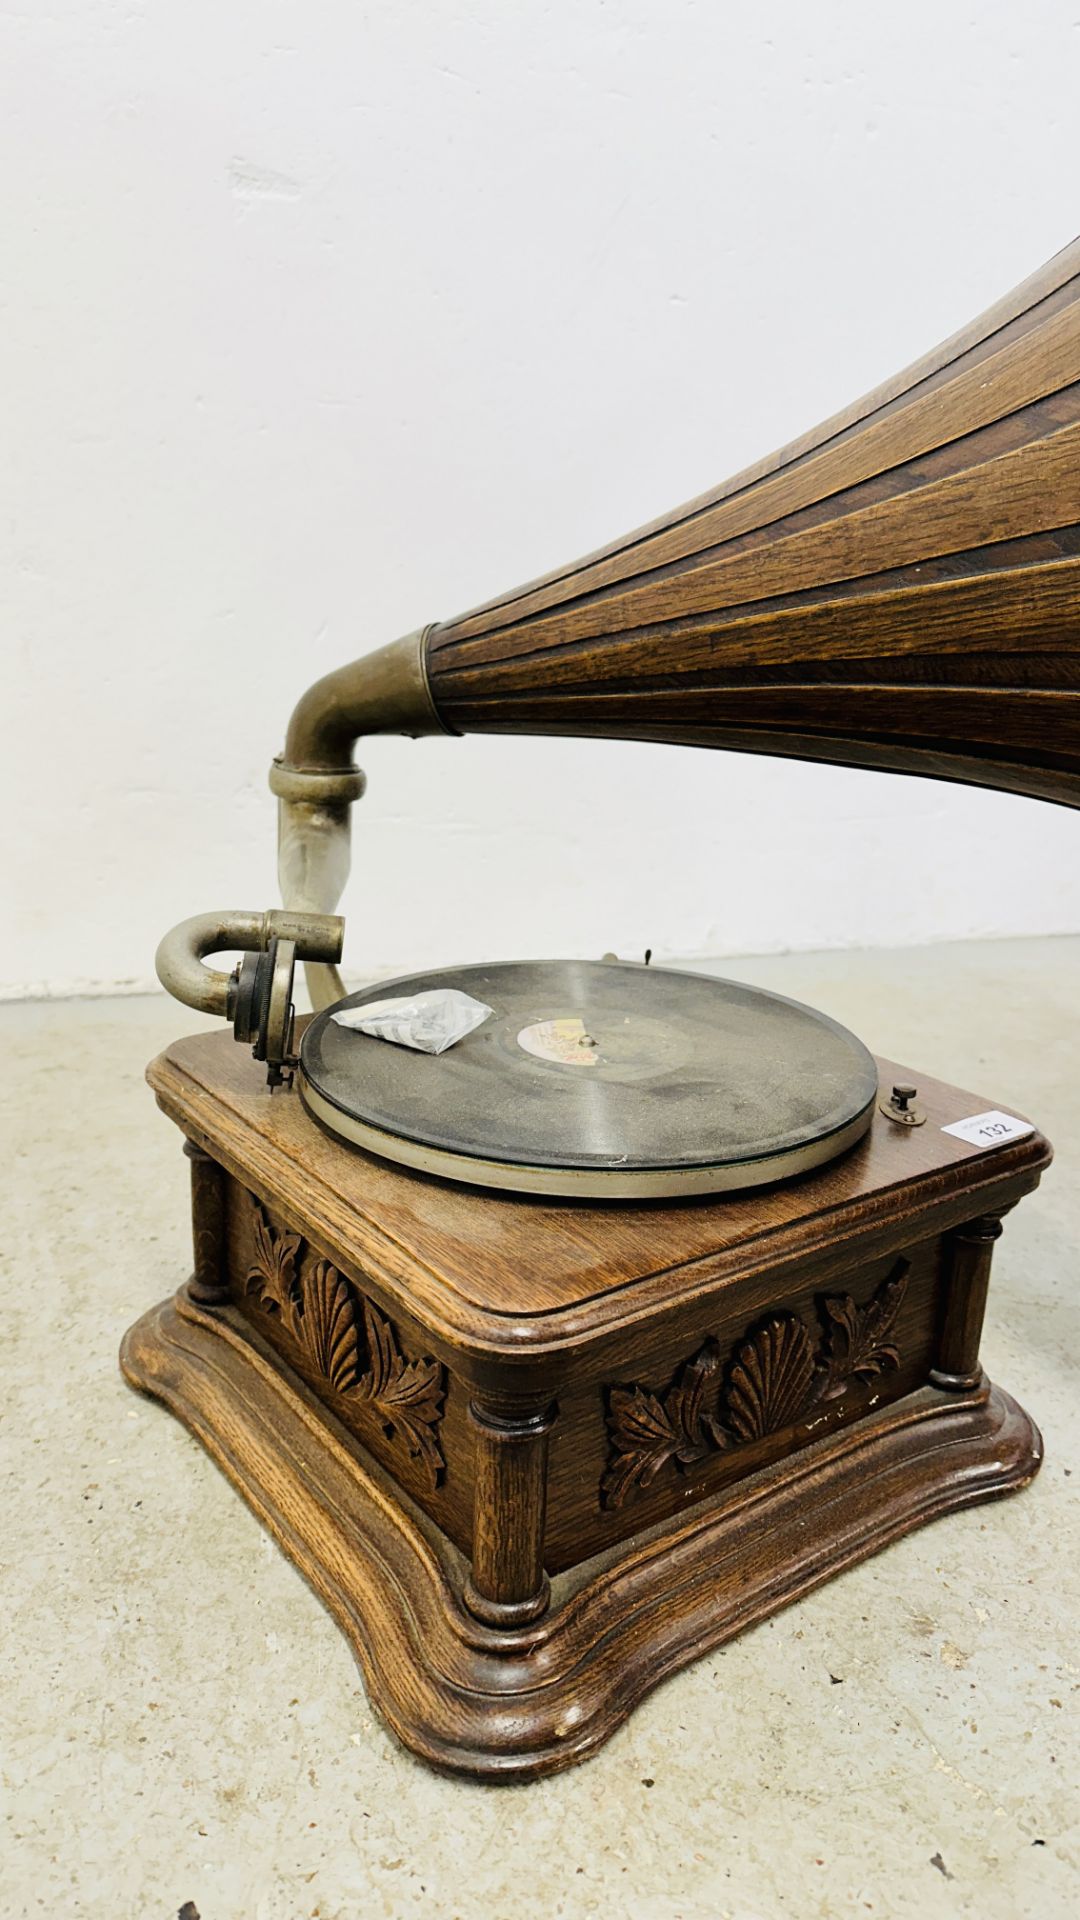 EARLY HMV GRAMOPHONE COMPANY OAK CASED "THE GRAMOPHONE Co" GRAMOPHONE WITH HORN. - Image 9 of 9